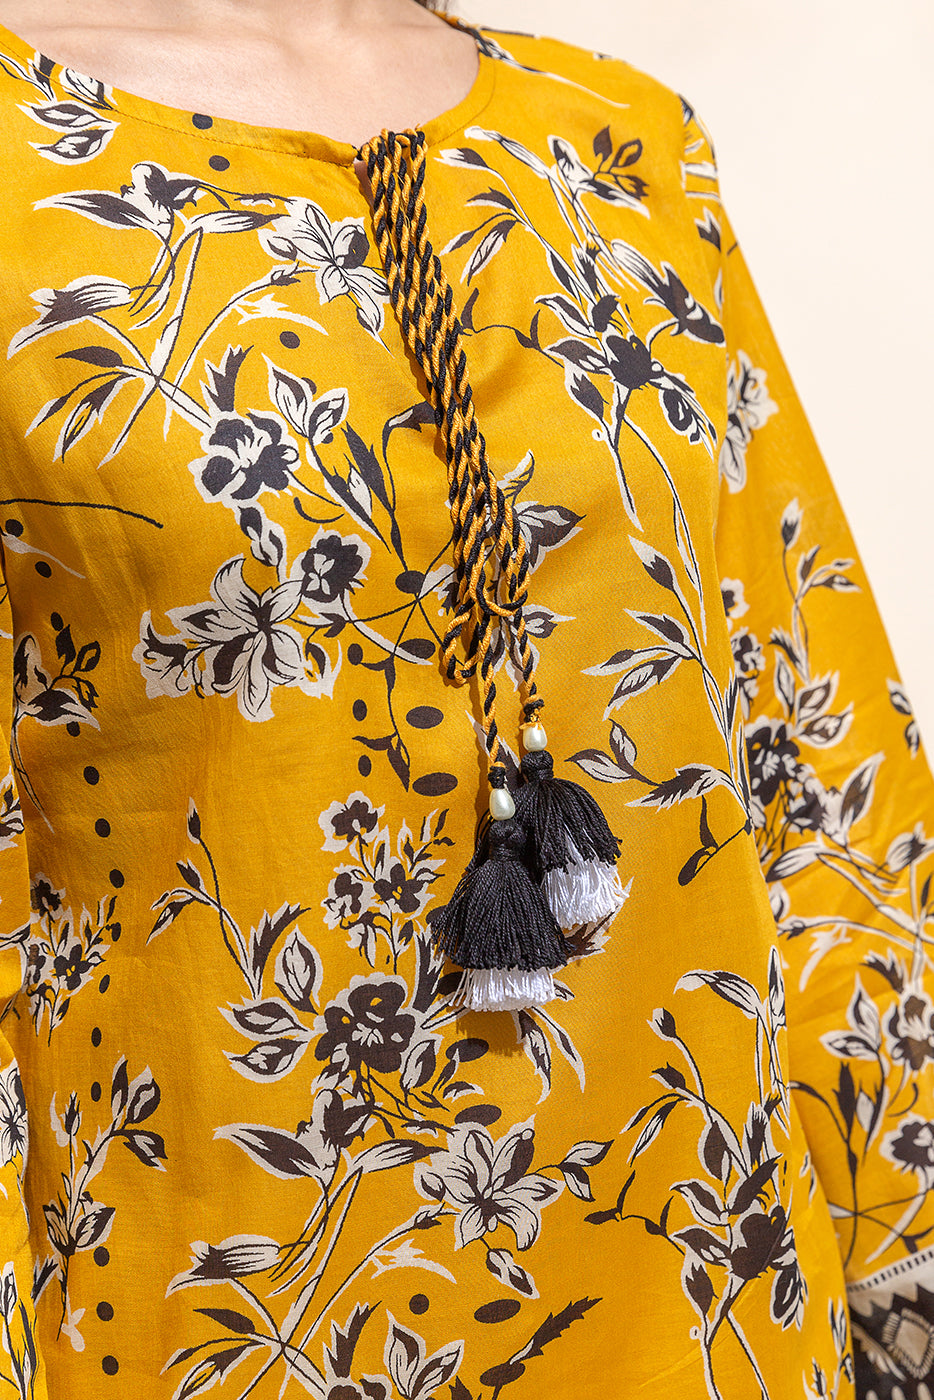 2 PIECE PRINTED LAWN SUIT-YELLOW MIST (UNSTITCHED)